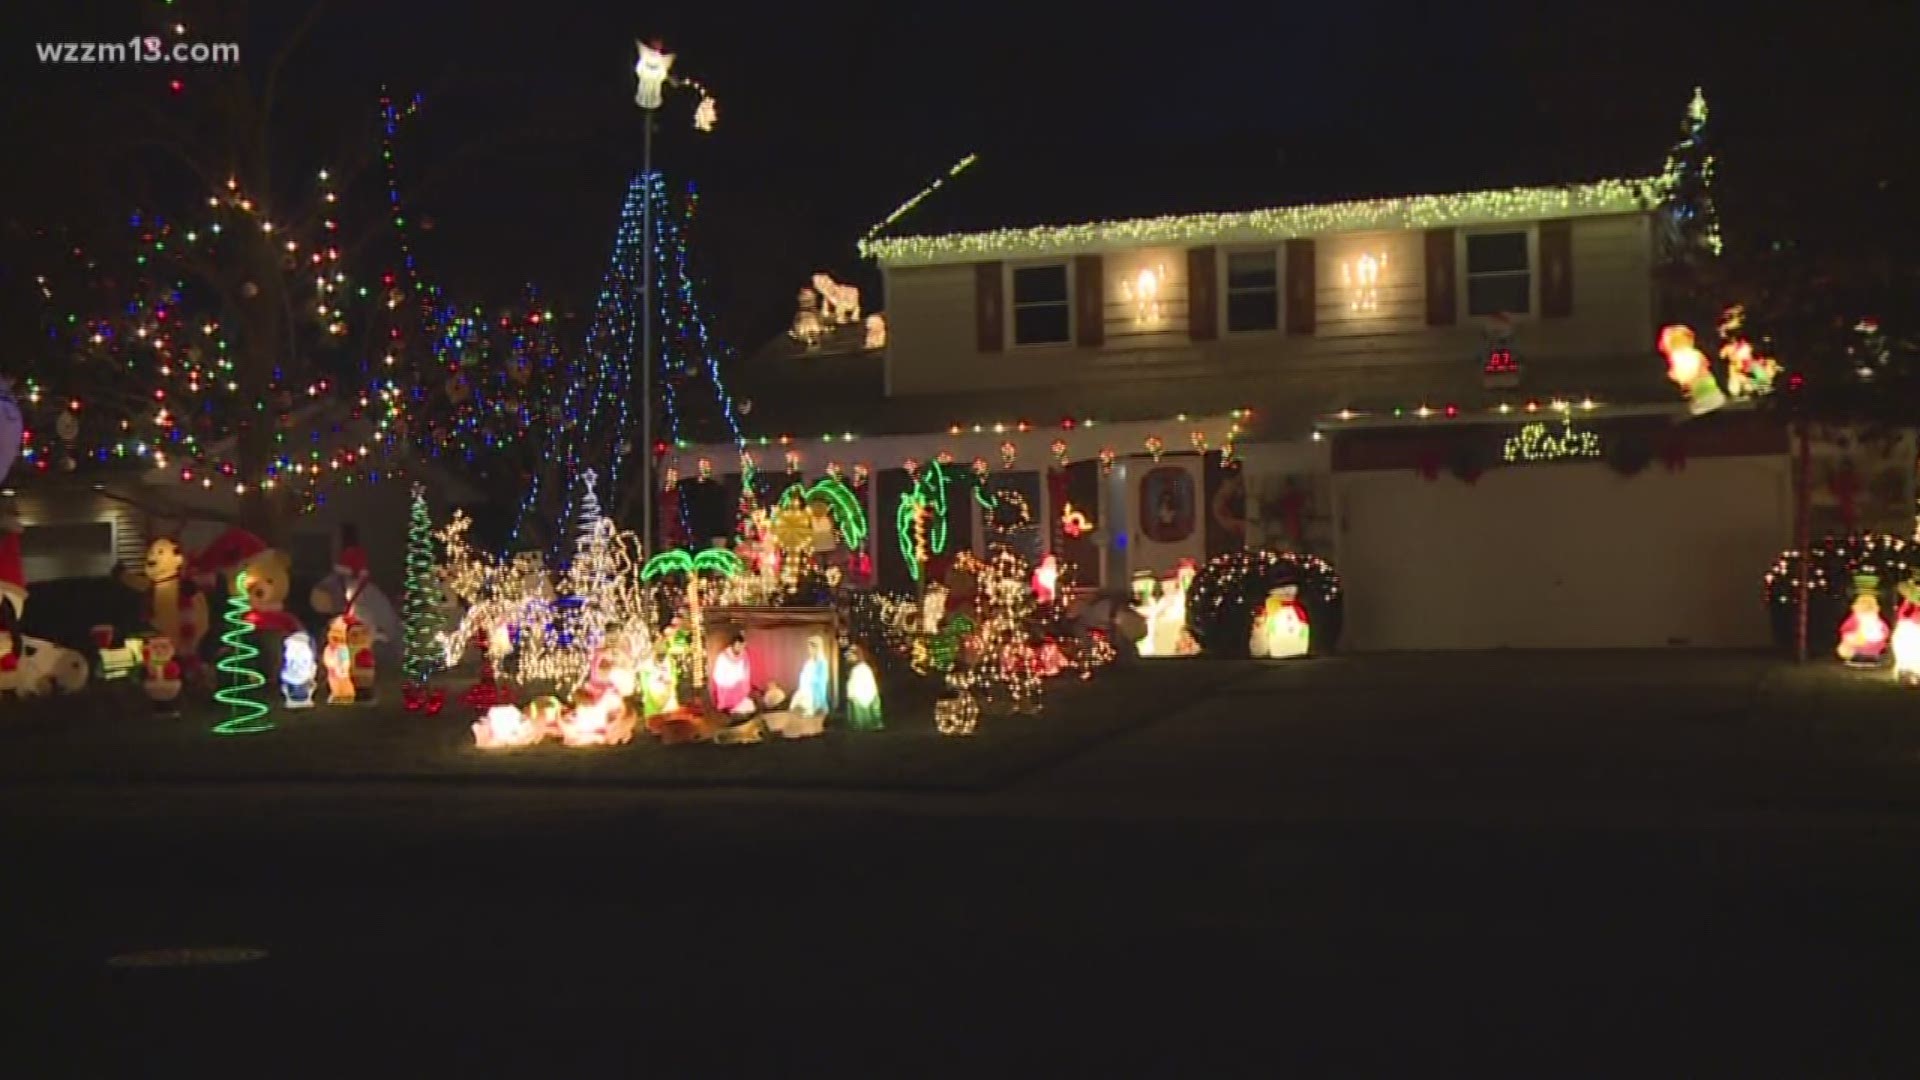 13 ON YOUR SIDE's Angela Cunningham takes a closer look at a Kentwood home that has an eye-catching light display.